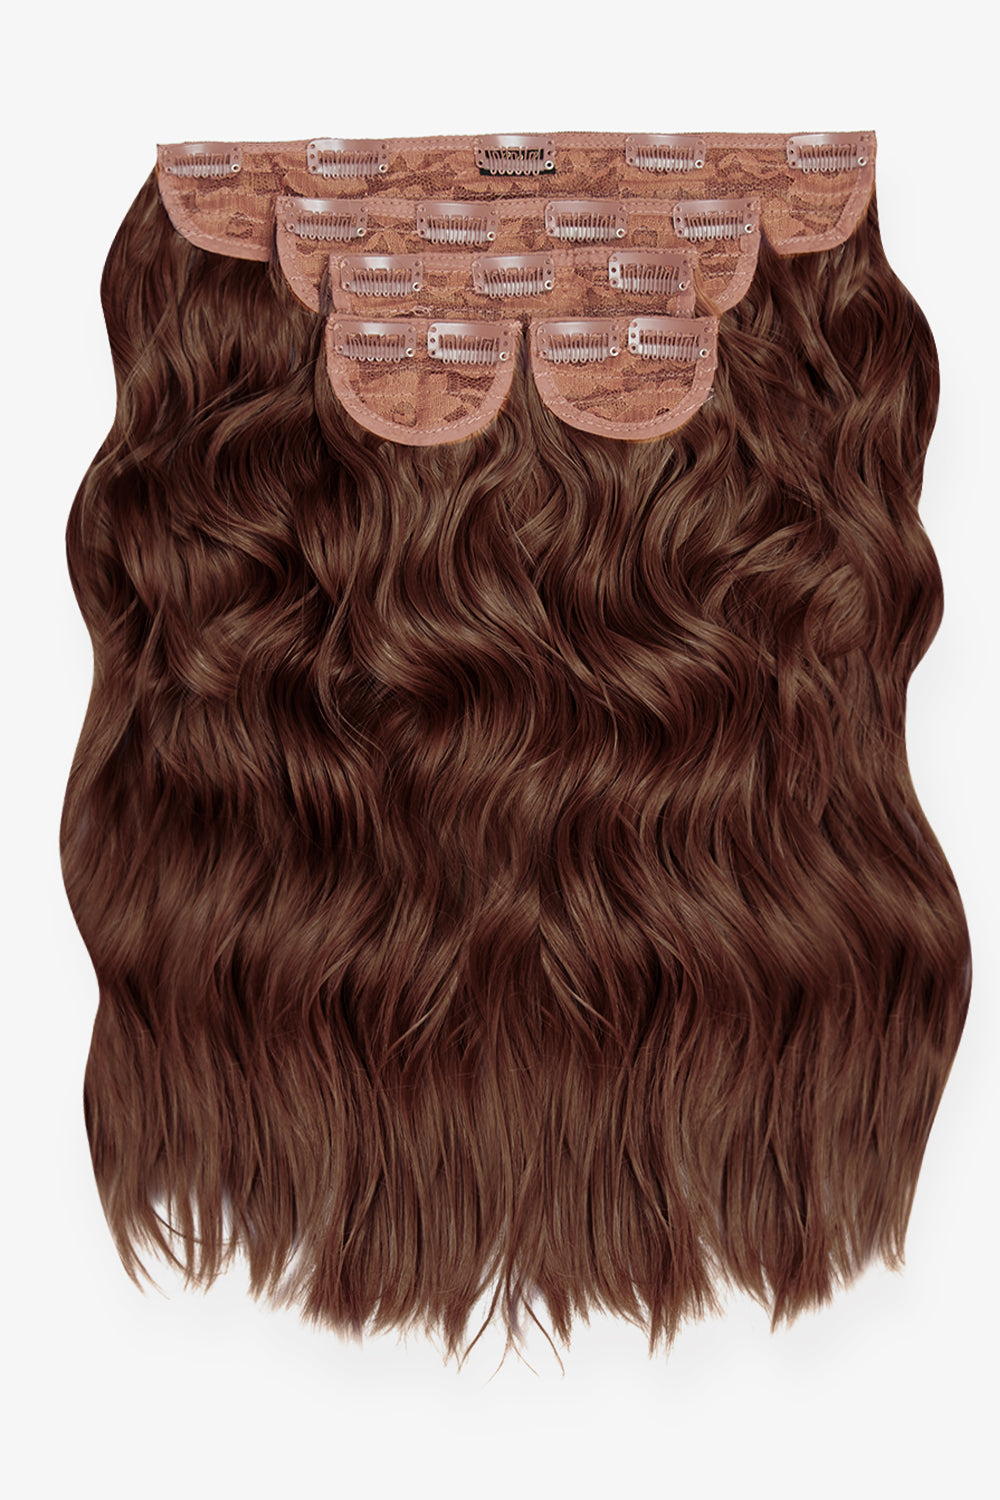 Super Thick 16’’ 5 Piece Brushed Out Wave Clip In Hair Extensions + Hair Care Bundle - Auburn